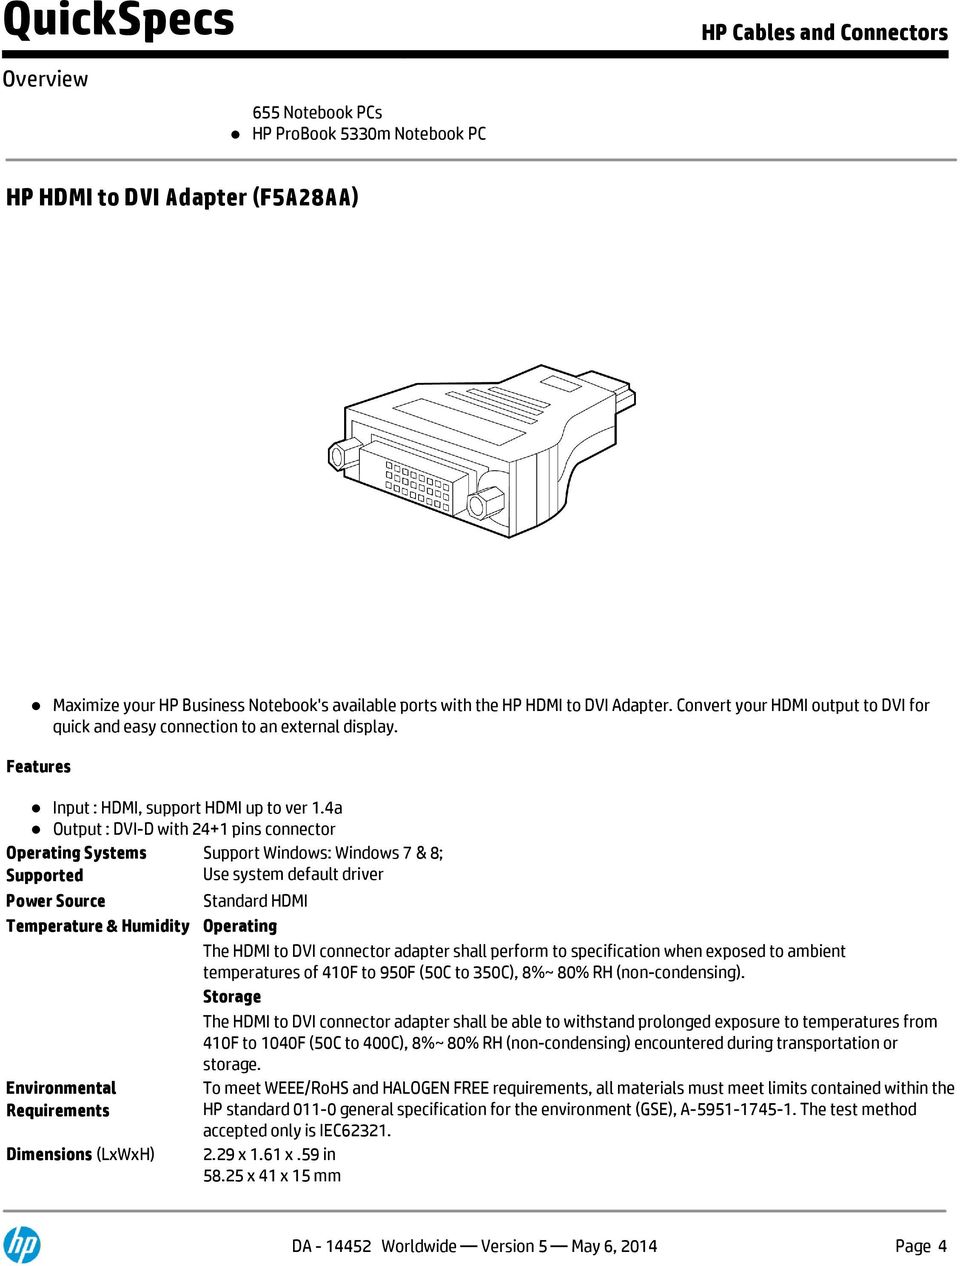 4a Output : DVI-D with 24+1 pins connector Operating Systems Supported Power Source Temperature & Humidity Environmental Requirements (LxWxH) Support Windows: Windows 7 & 8; Use system default driver